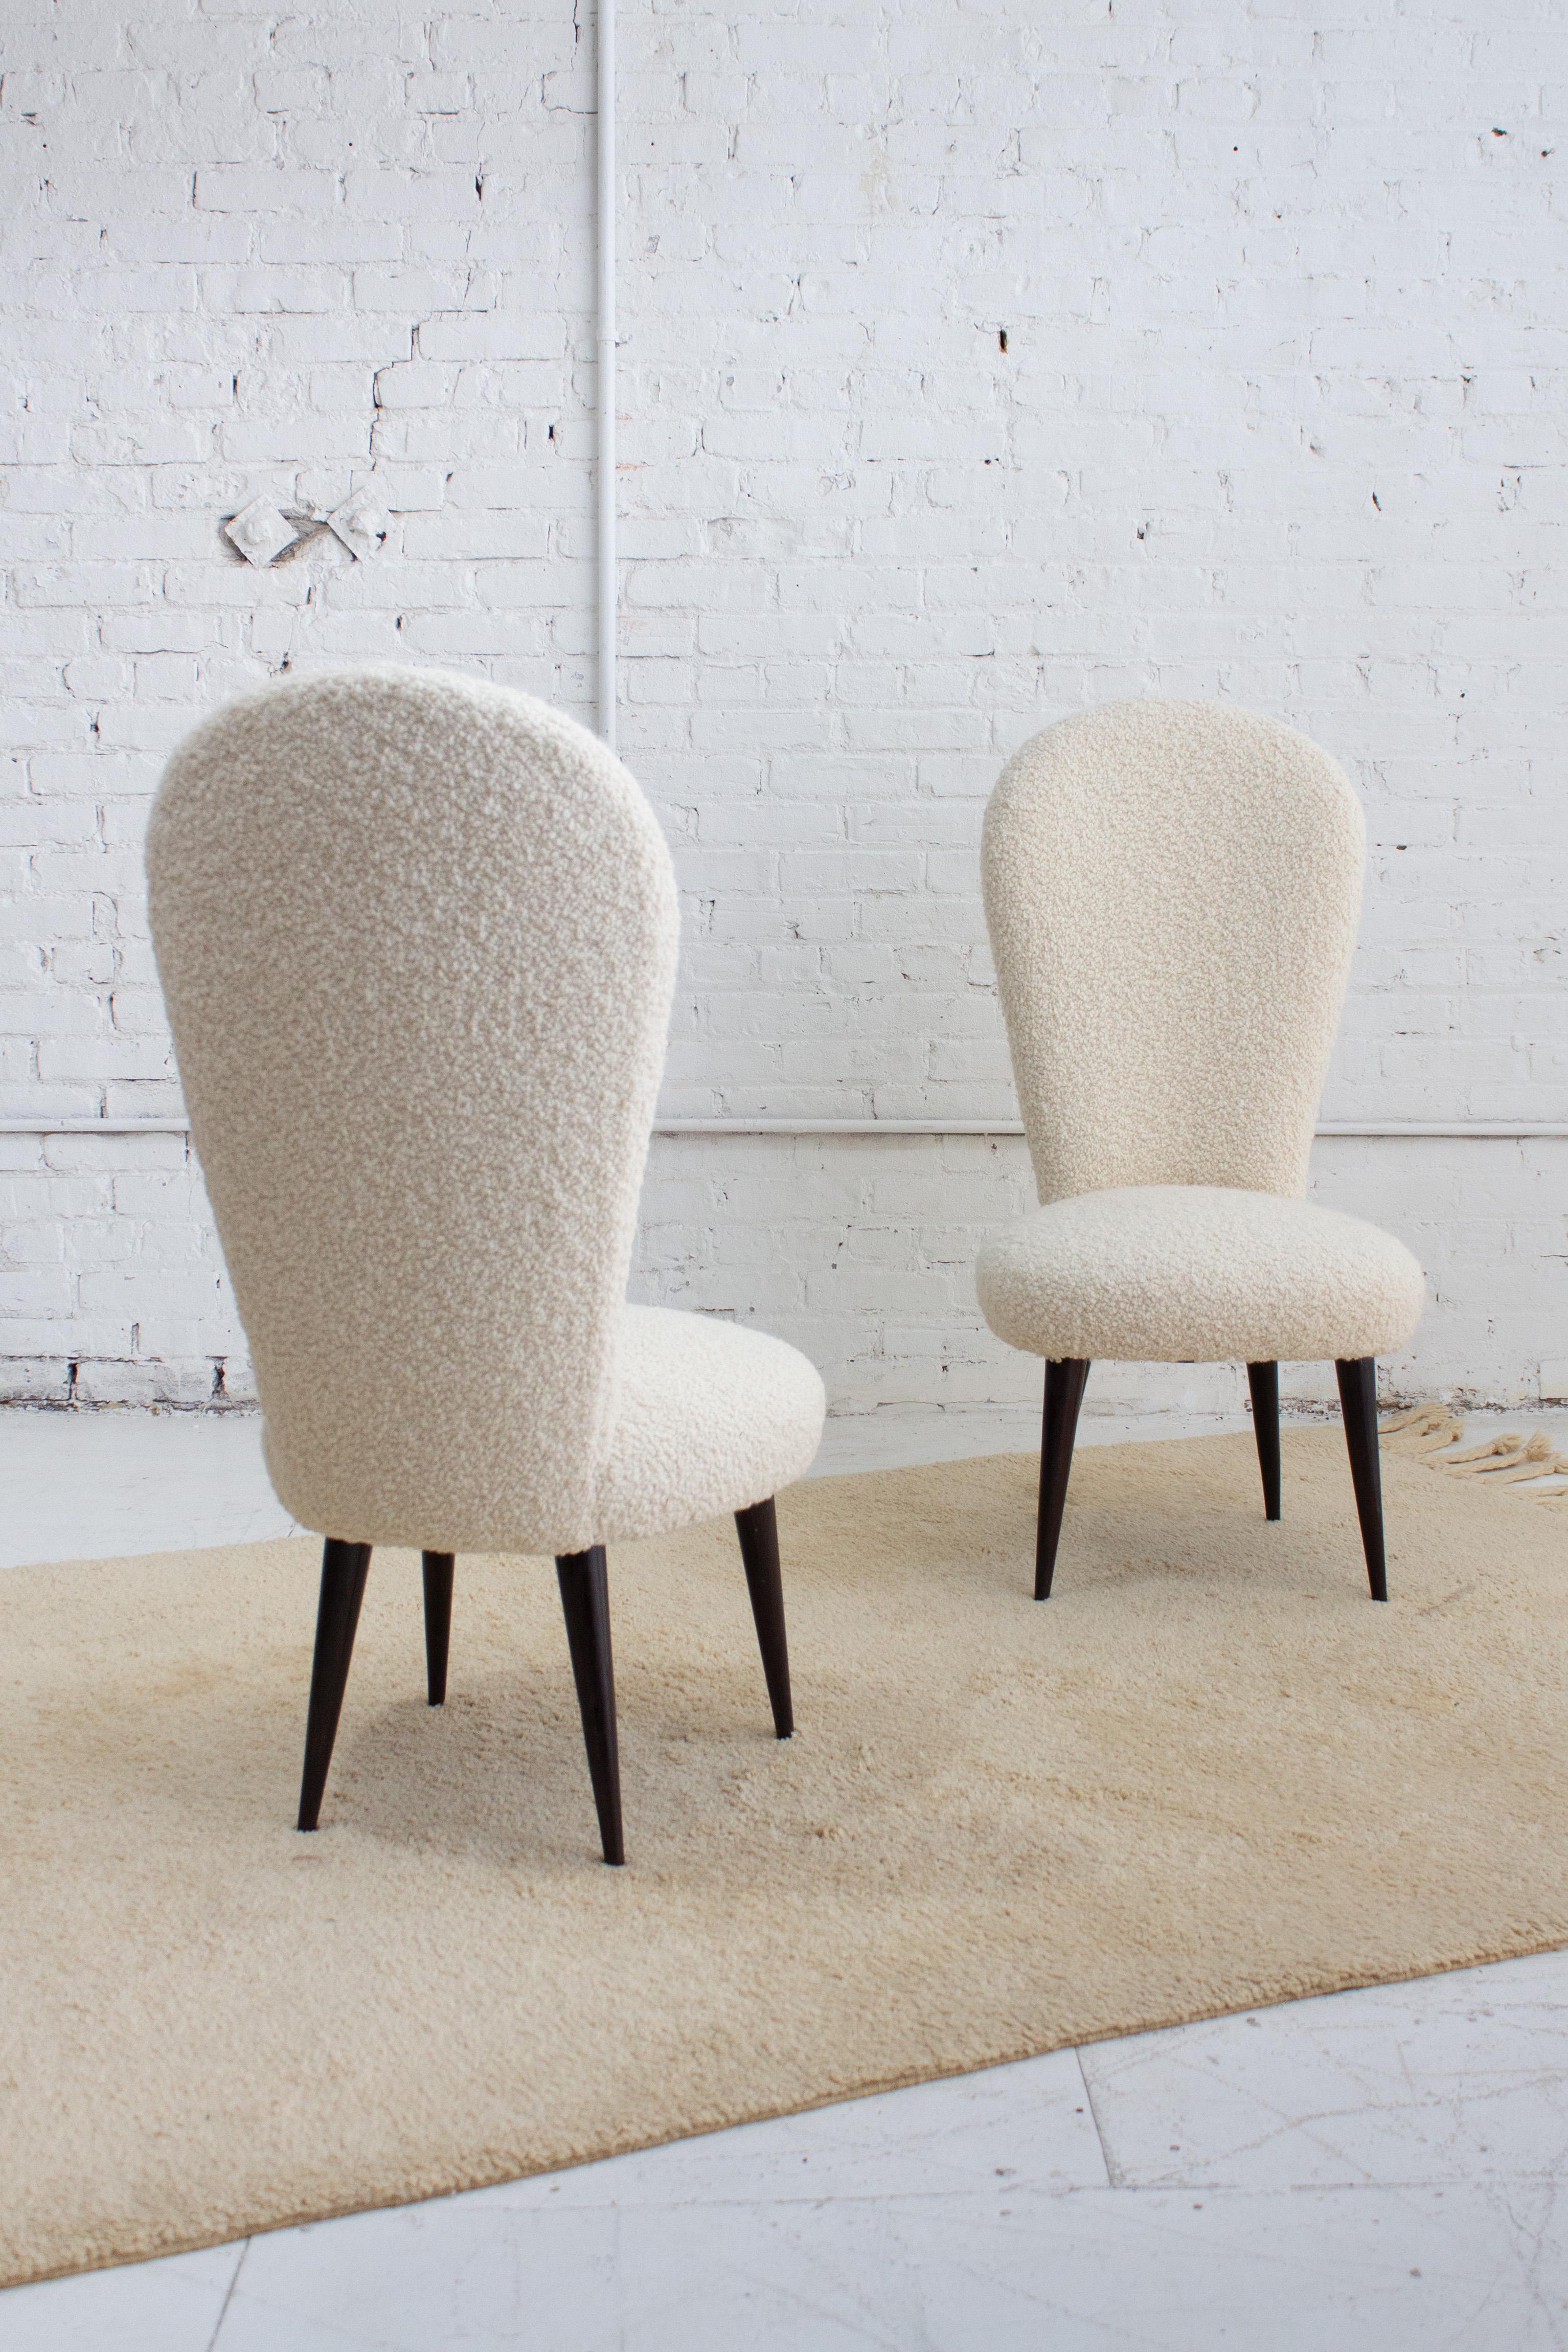 20th Century High Back Italian Chairs in Cream Bouclé - a Pair For Sale